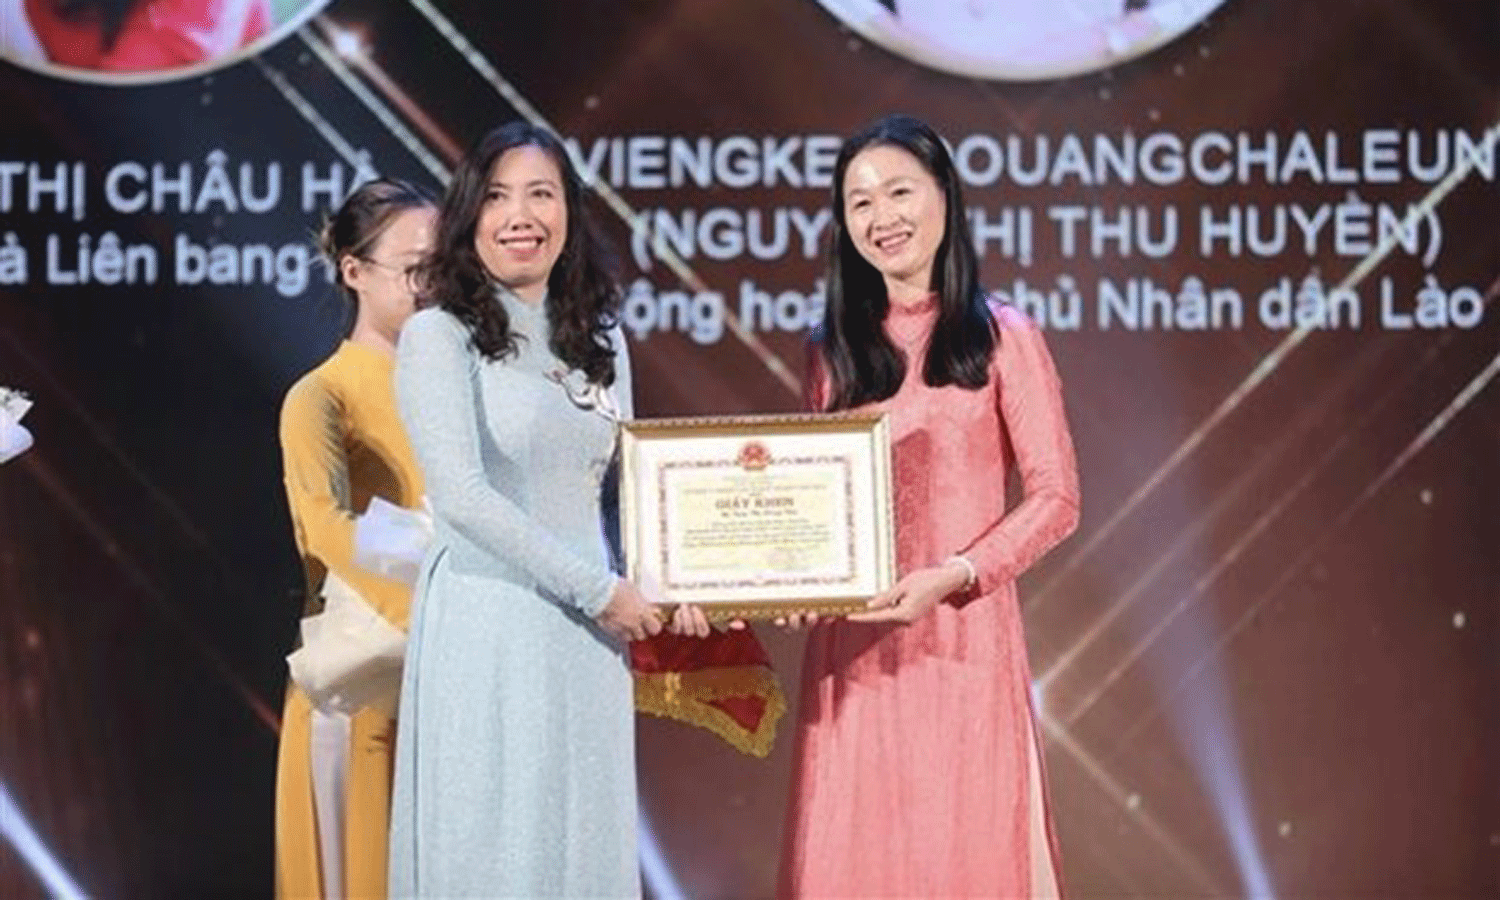 Deputy Minister of Foreign Affairs Le Thi Thu Hang (left) gives a certificate of merit to a candidate who won the title 